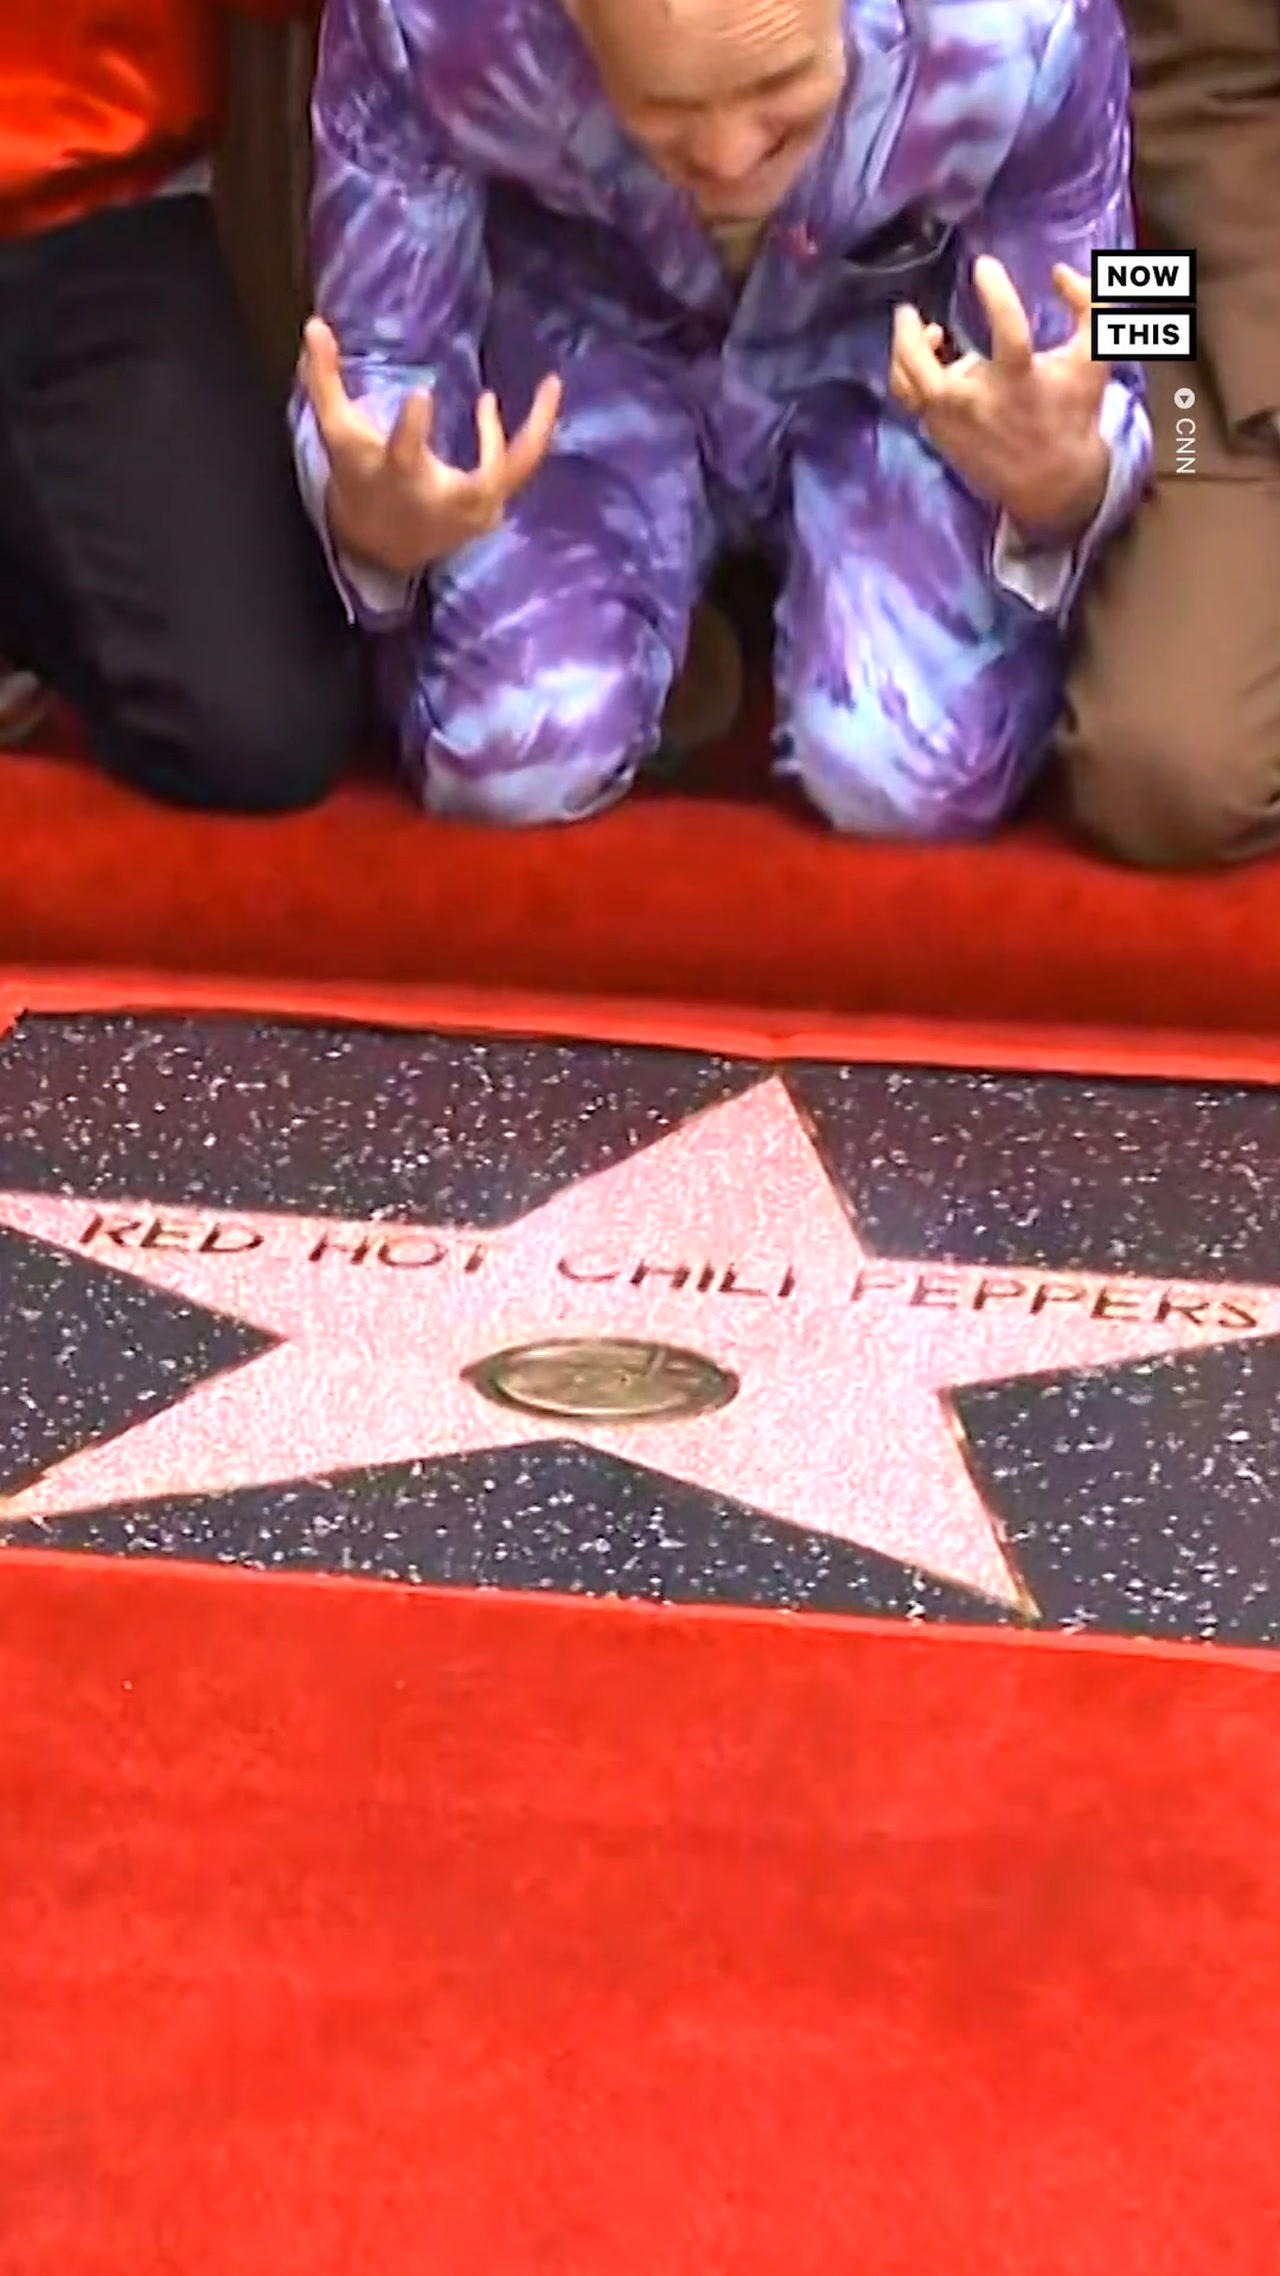 Red Hot Chili Peppers Get Hollywood Walk of Fame Star